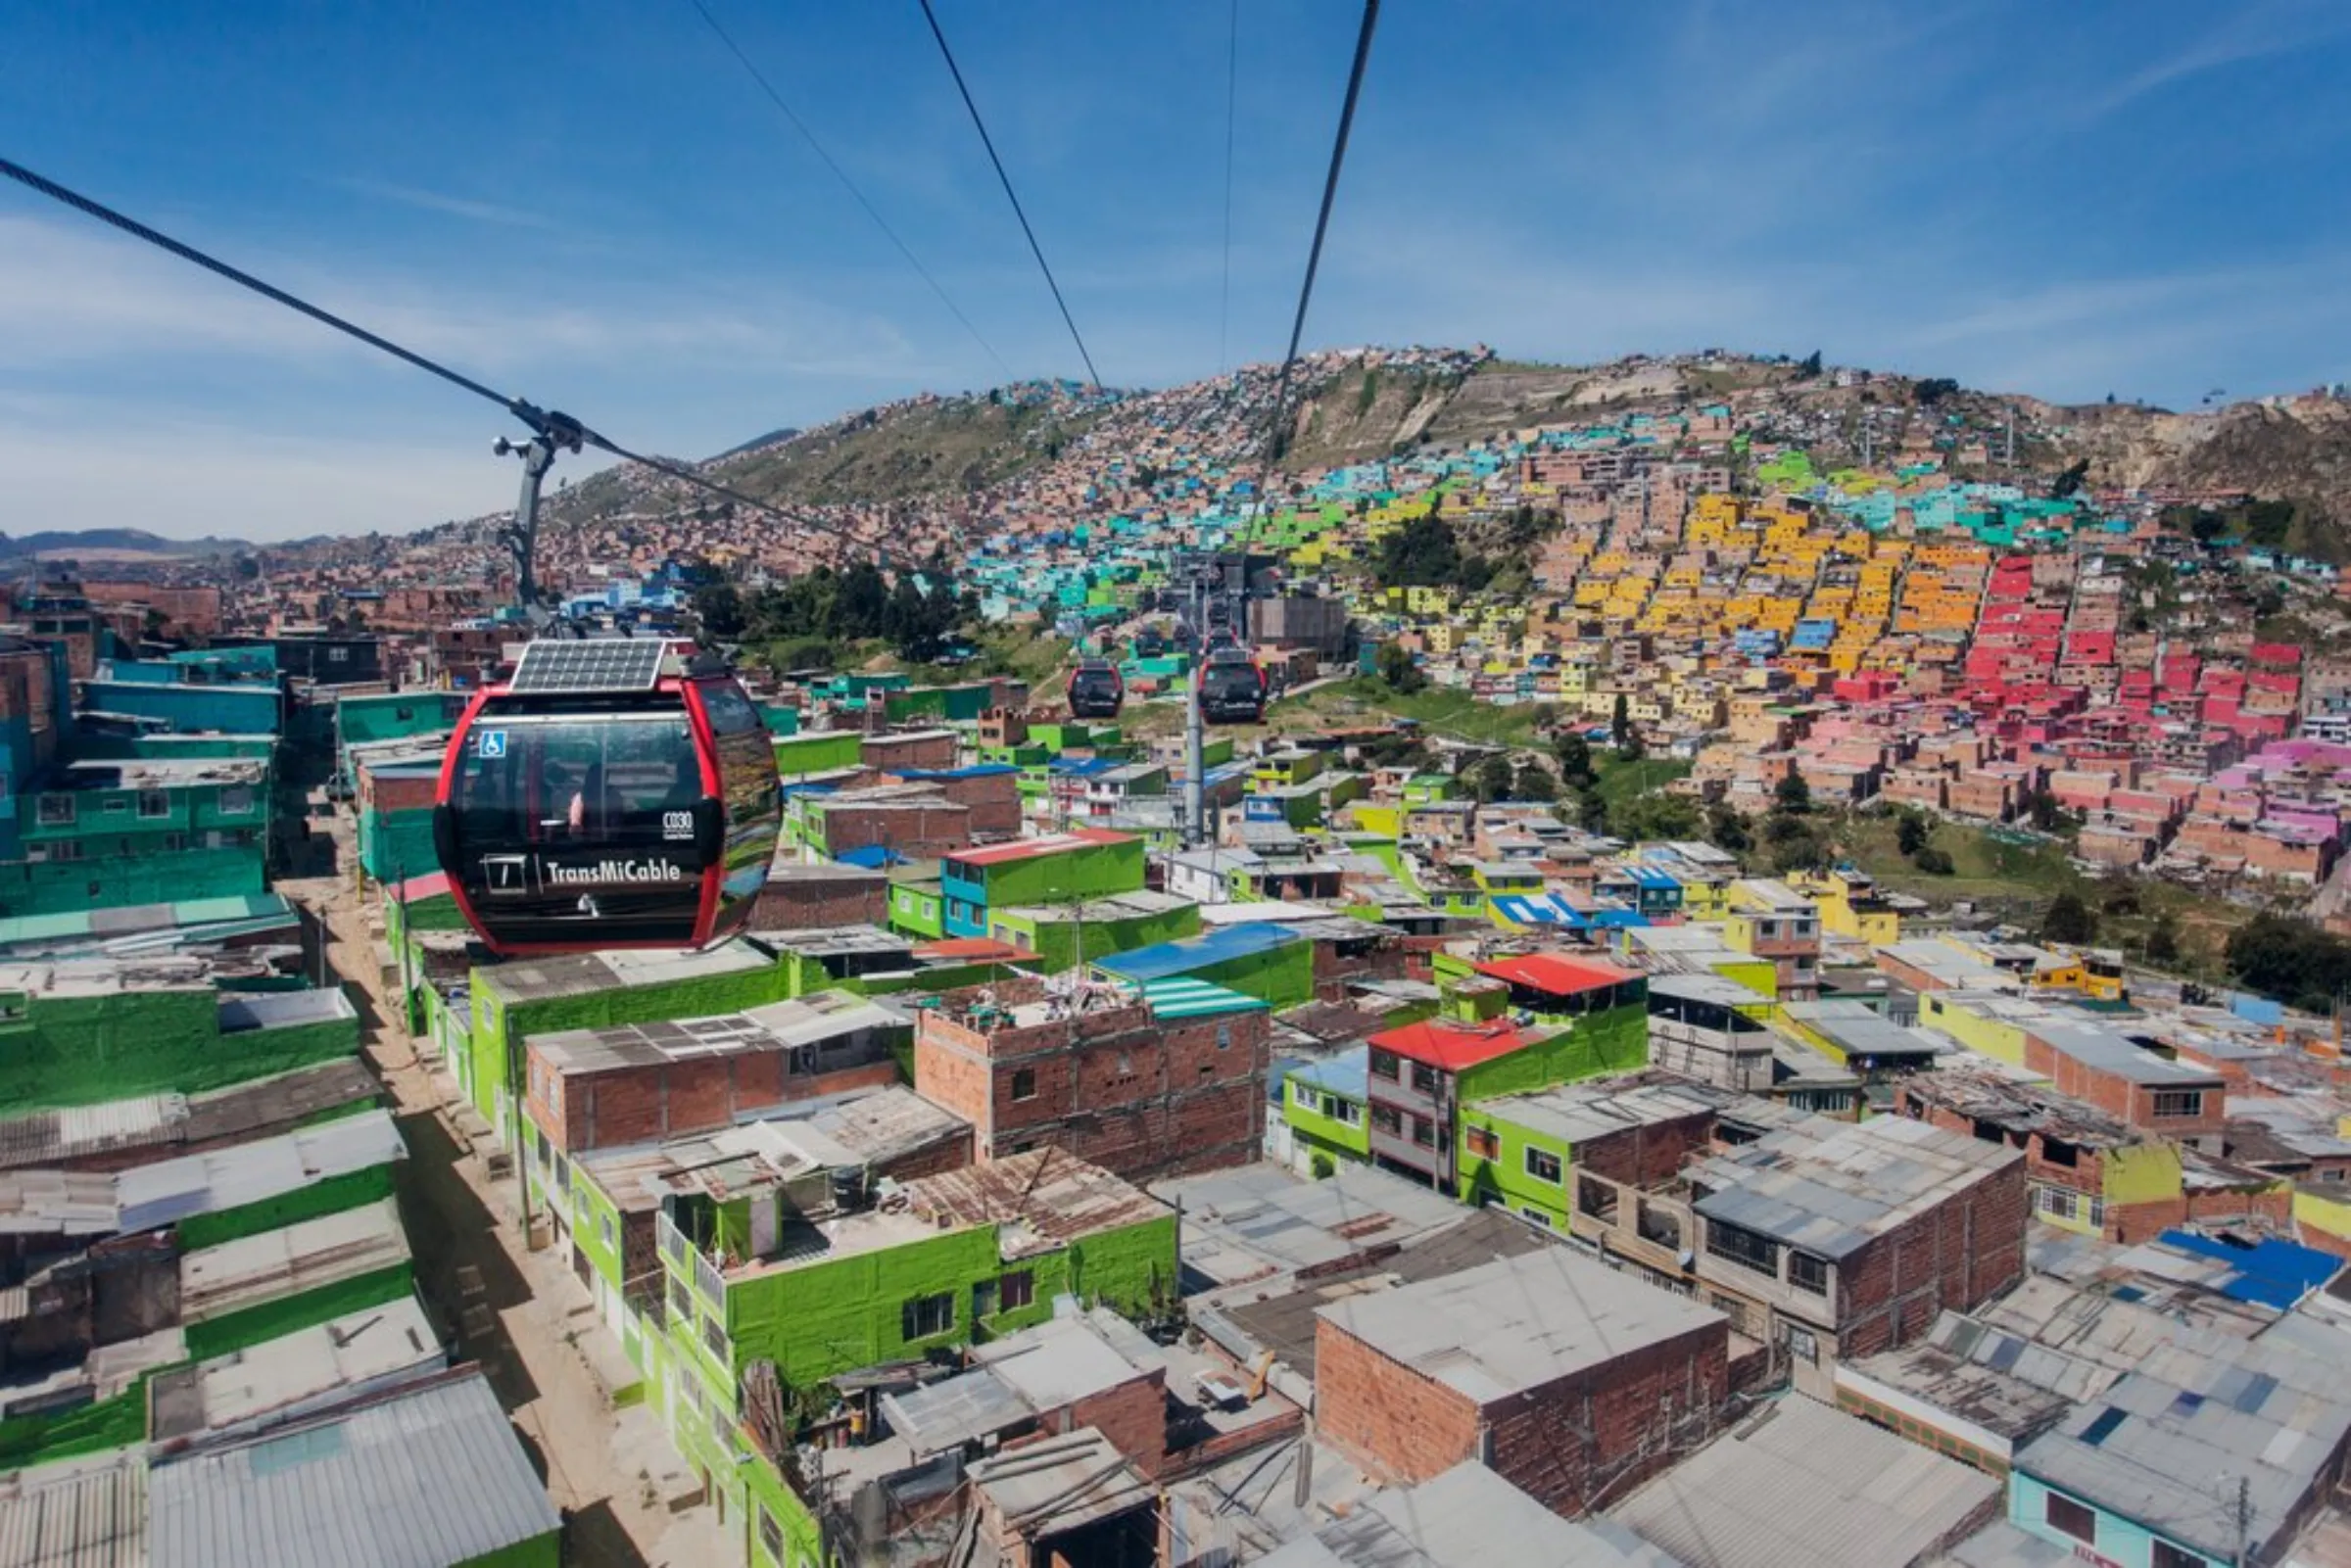 Cable cars travel over houses in Bogota, Colombia, April 20, 2021. The gondola network helps connect residents in steep hillside districts with the city’s northwest areas